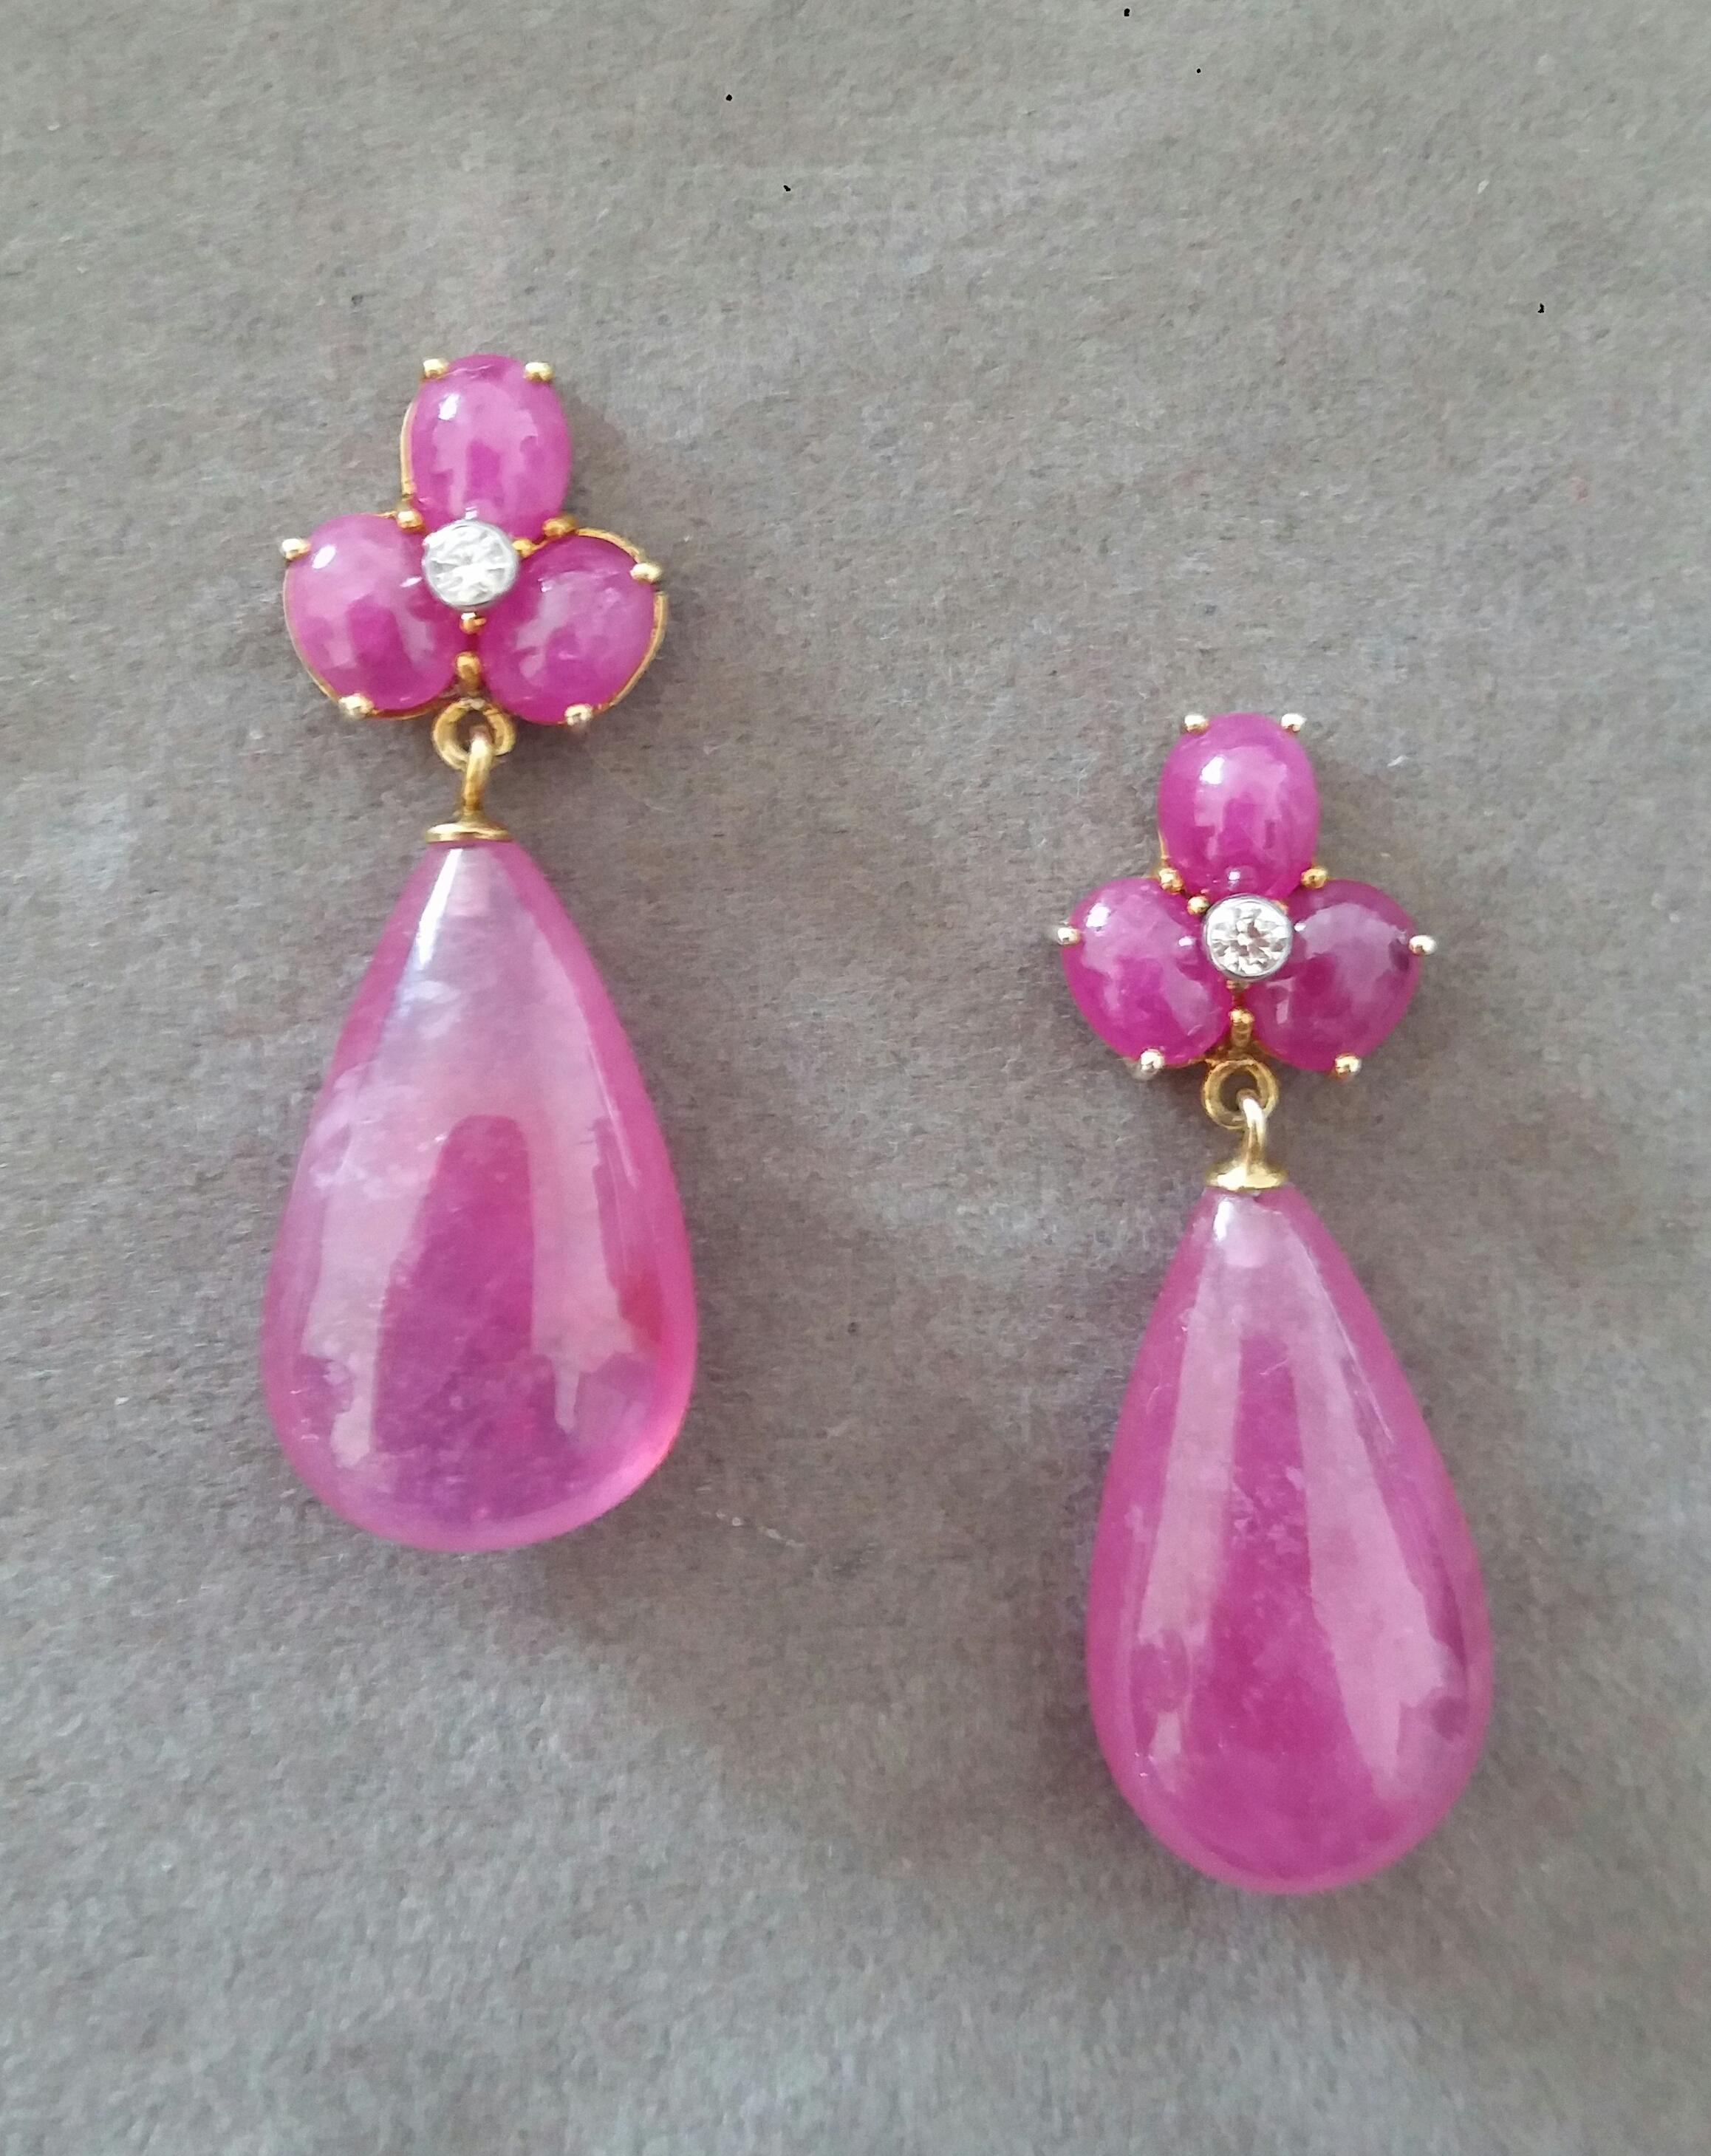 Elegant and completely handmade Earrings consisting of an upper part of 3 oval shape Ruby cabs of 4 mm x 5 mm set together in 14 Kt yellow gold with 2 small diamonds in the center, at the bottom 2 nice big size Pear Shape Natural Rubies measuring 13